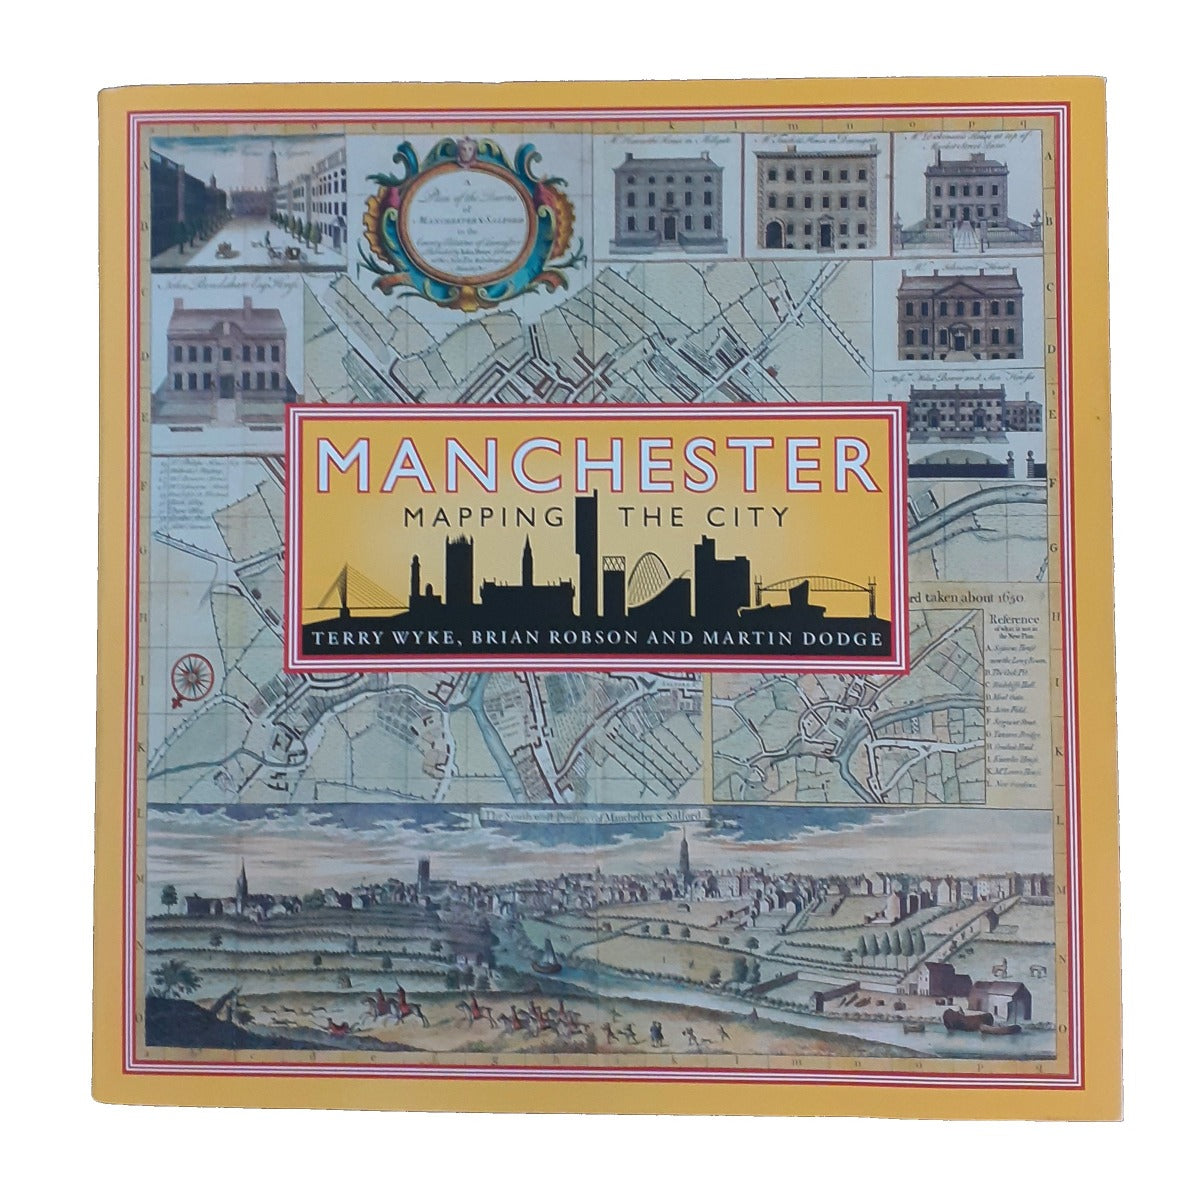 Manchester: Mapping the City book cover.